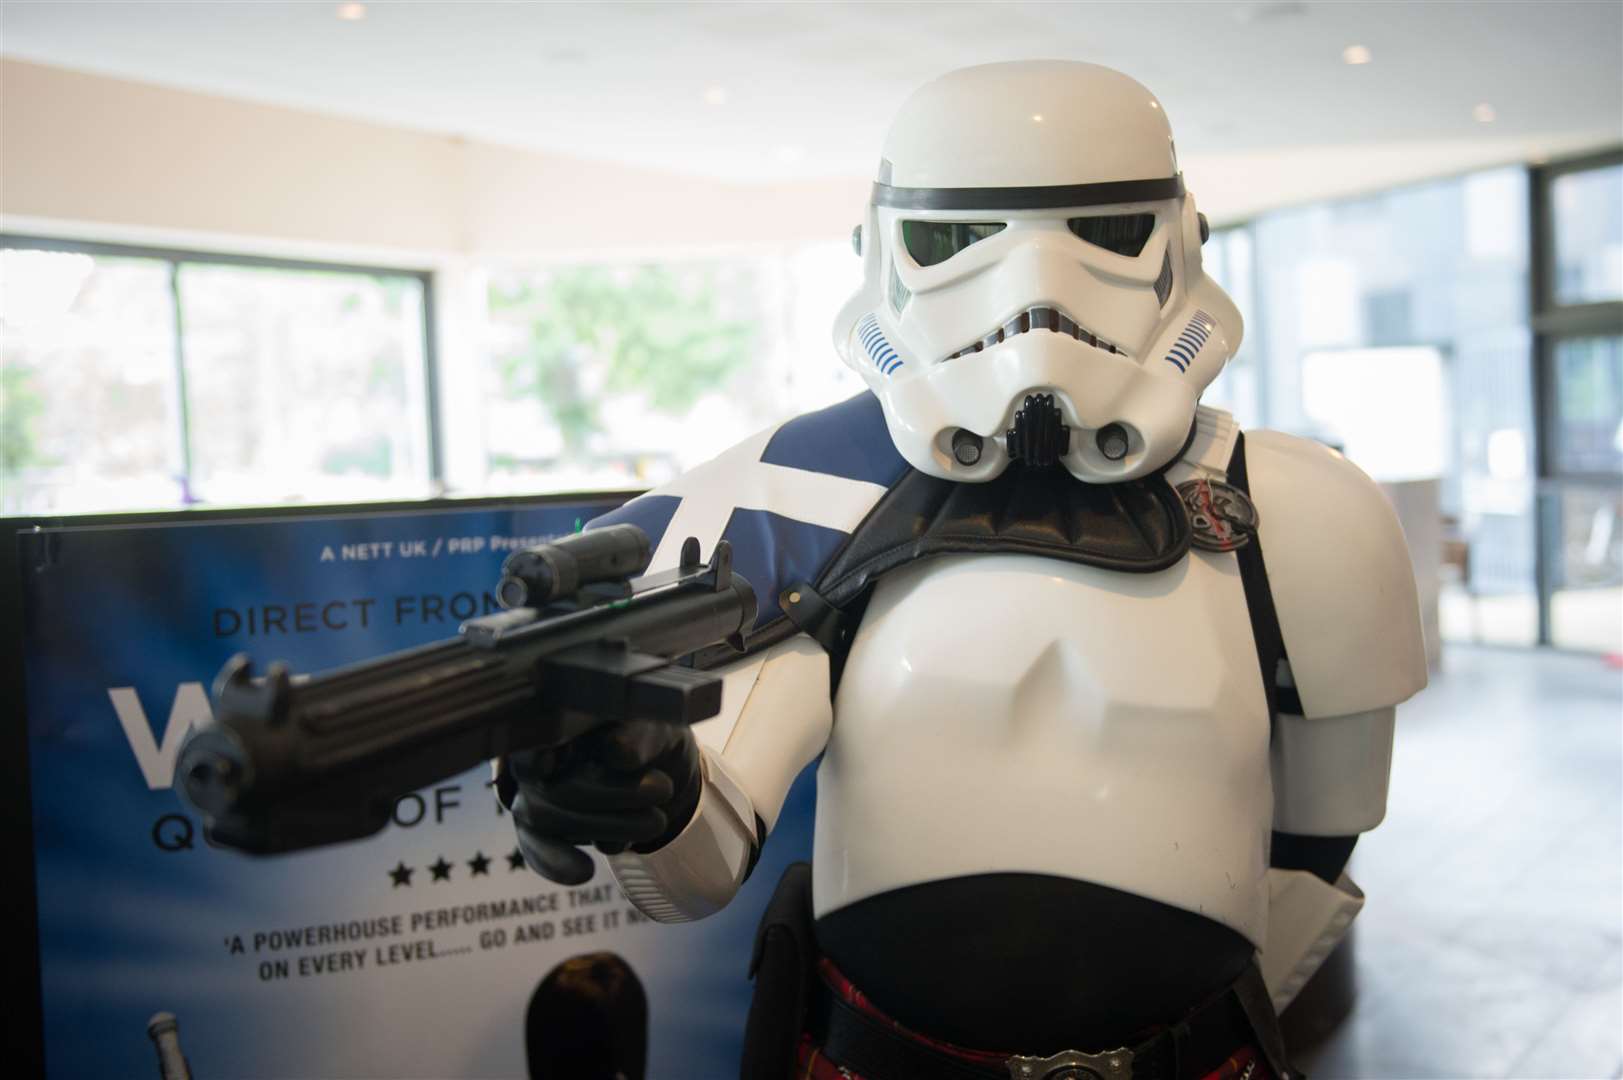 A Star Wars Stormtrooper will be among the franchise favourites delighting kids of all ages (file image). Picture: Callum Mackay.